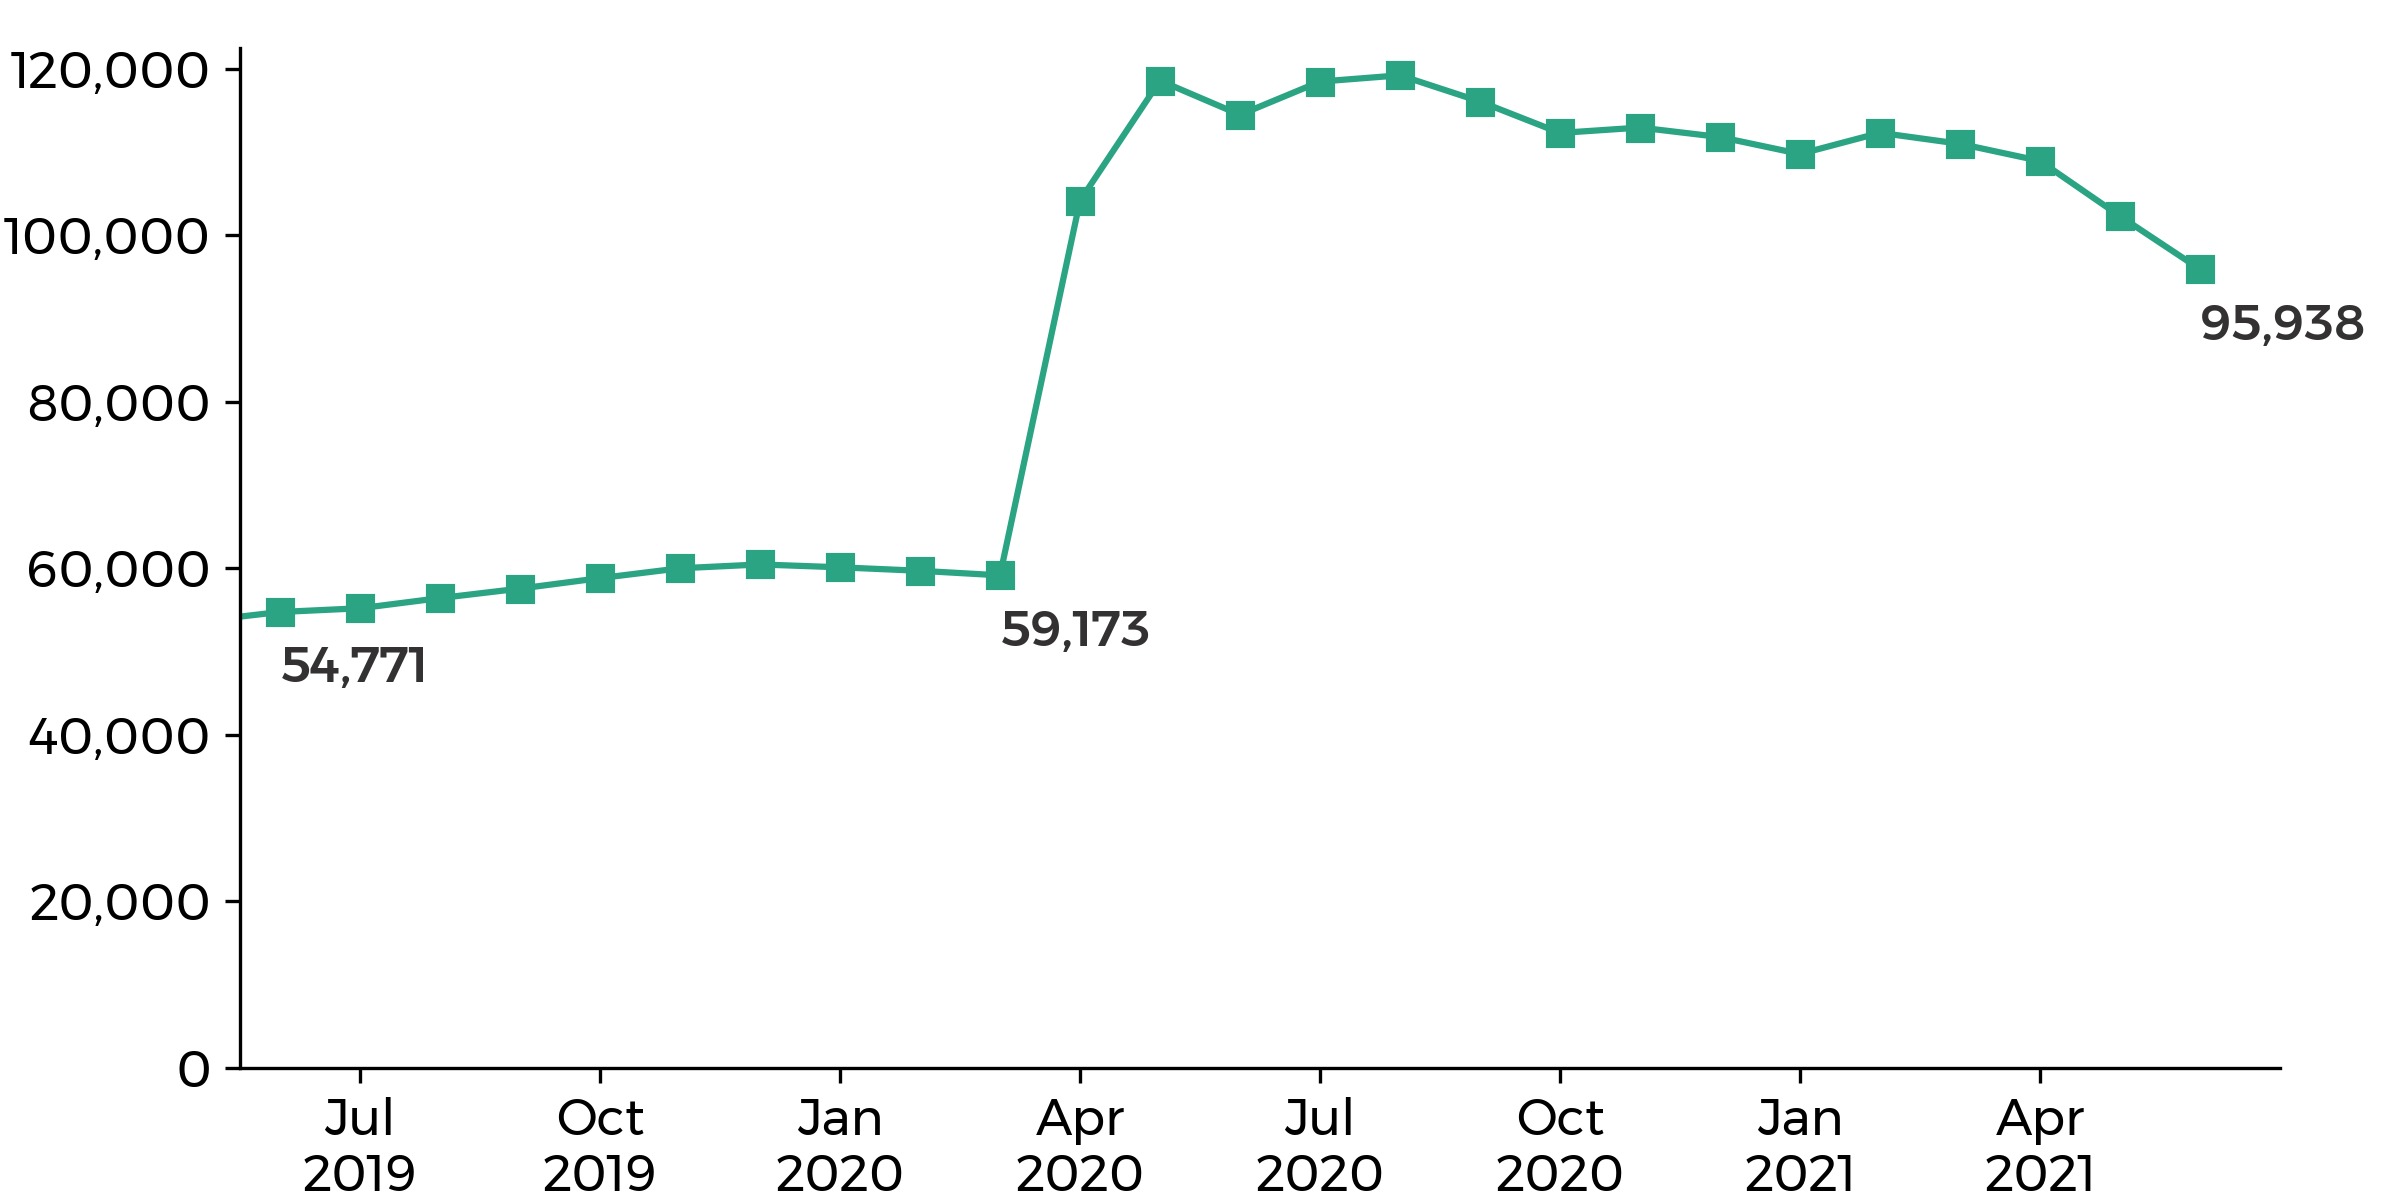 graph showing the Wales claimant count went up from 59,173 in March 2020 to 119,232 in August 2020, then decreasing to 95,938 in June 2021.